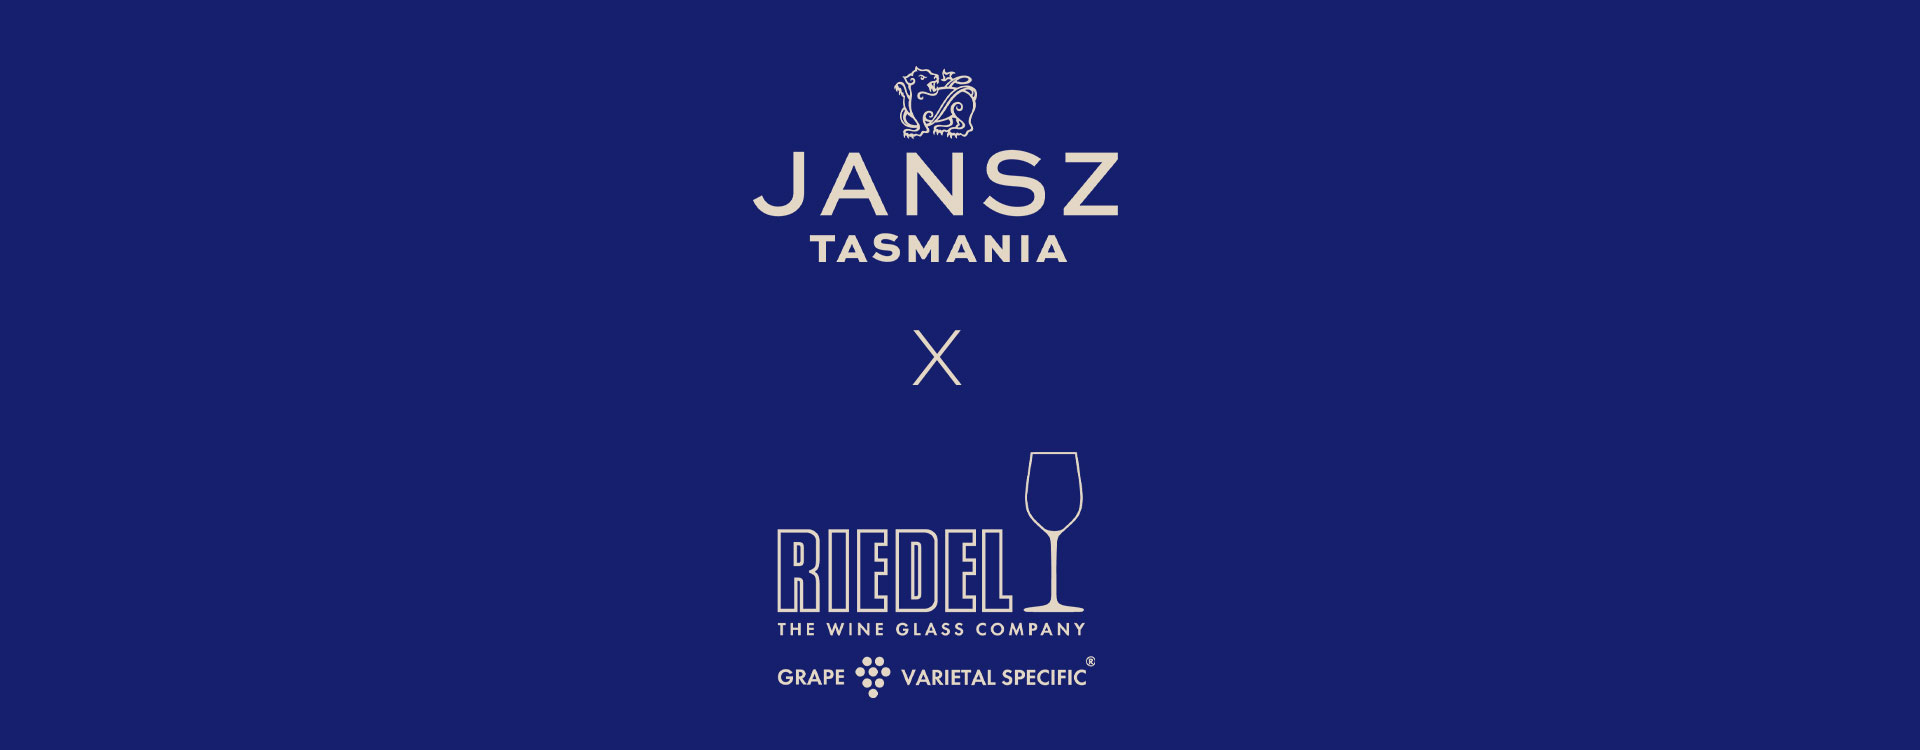 Jansz x Riedel Tasting Event with Maximilian Riedel on glorious Sydney Harbour